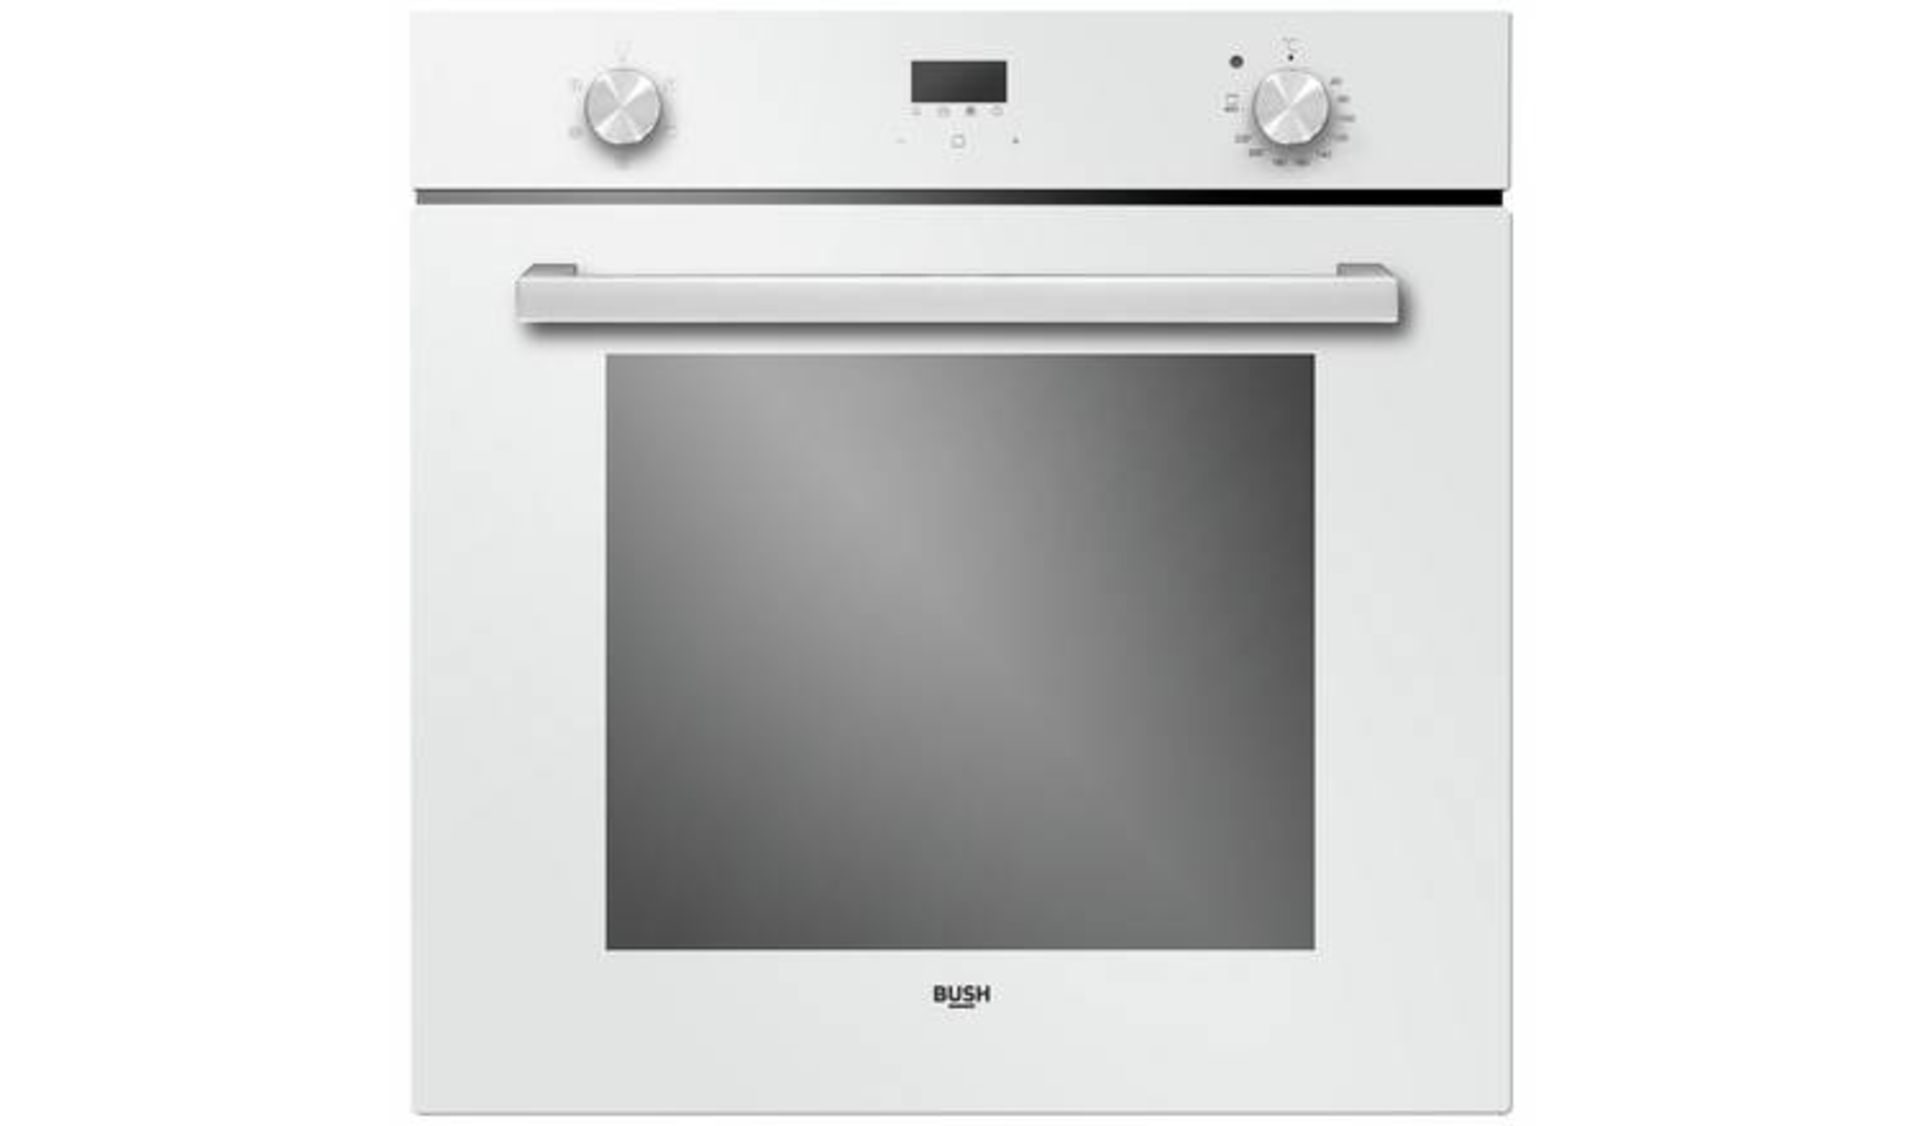 + VAT Grade A/B Bush RLWFO Built In Single Electric Oven - 68 Litre Capacity - A Energy Rating -